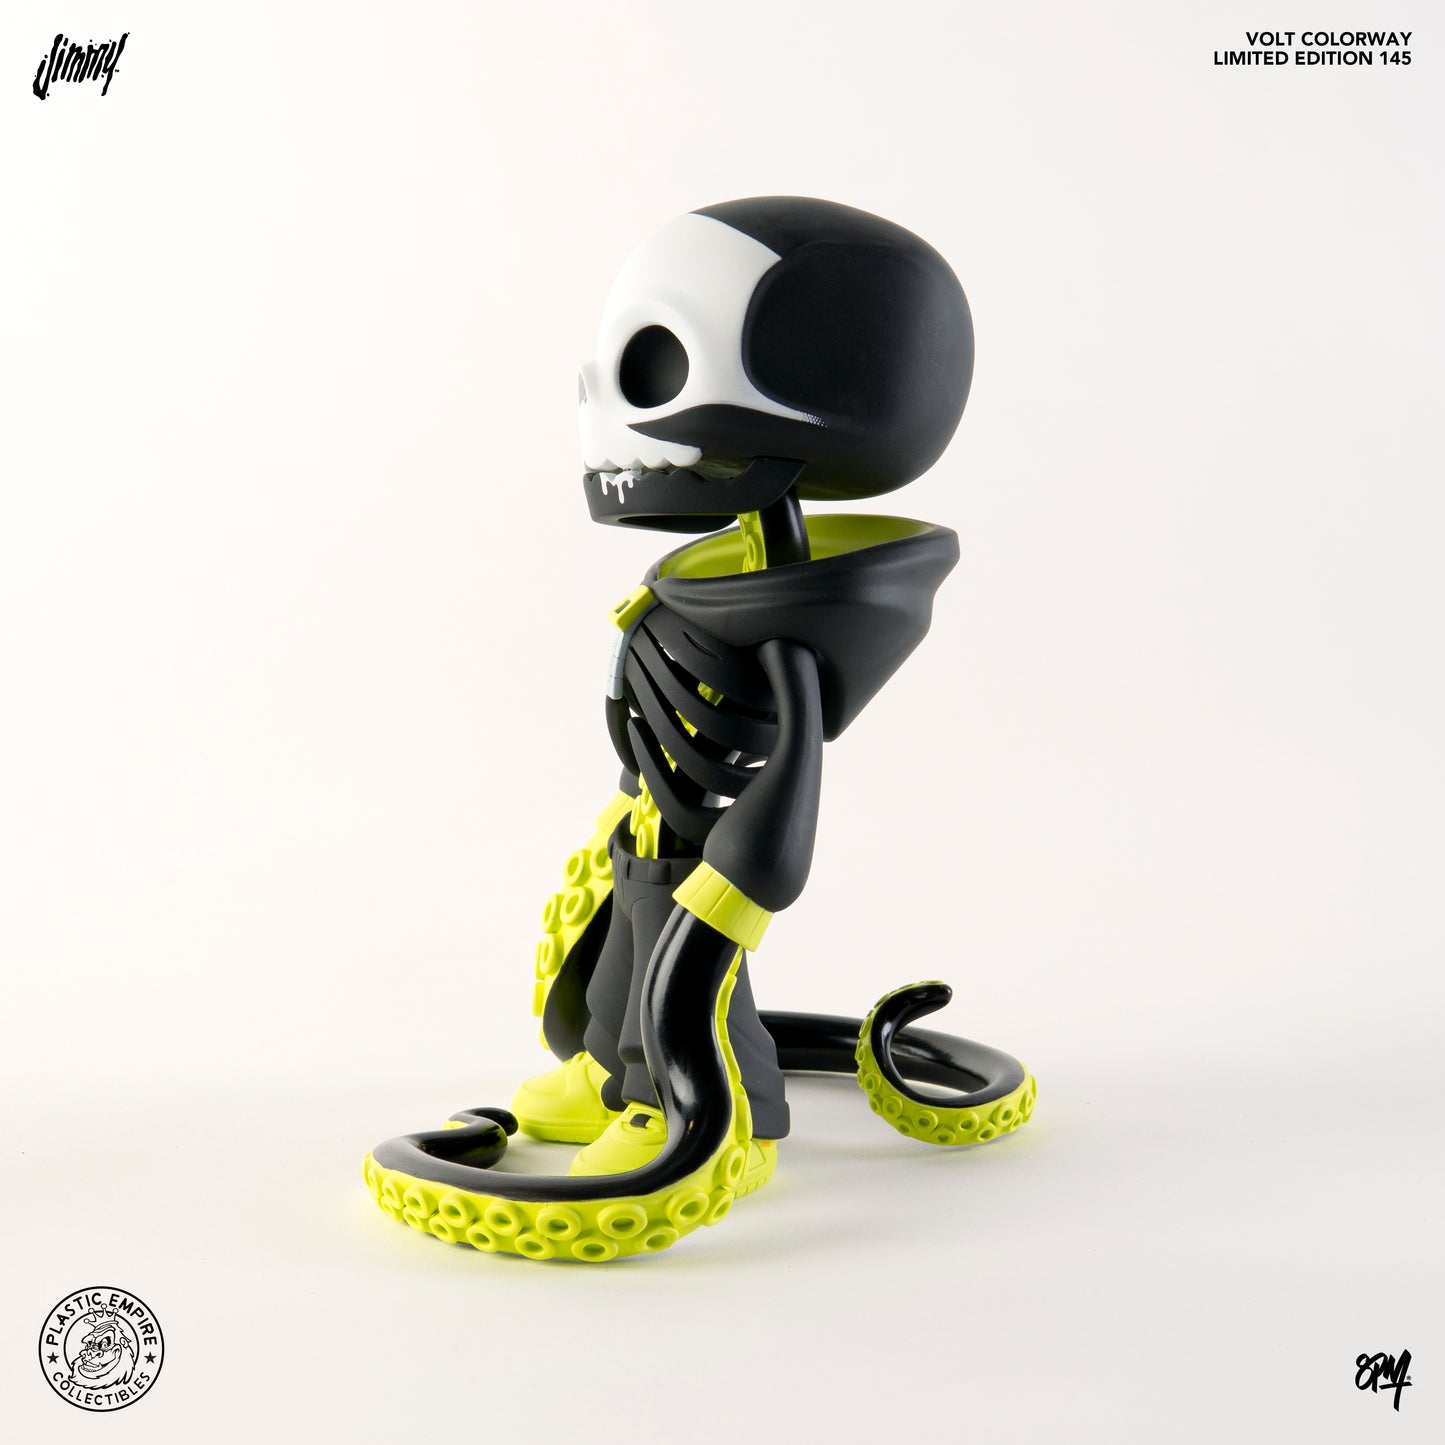 JIMMY VINYL 8" VOLT COLORWAY BY 8PM PLASTIC EMPIRE EXCLUSIVE FIGURE IN STOCK CYBER MONDAY